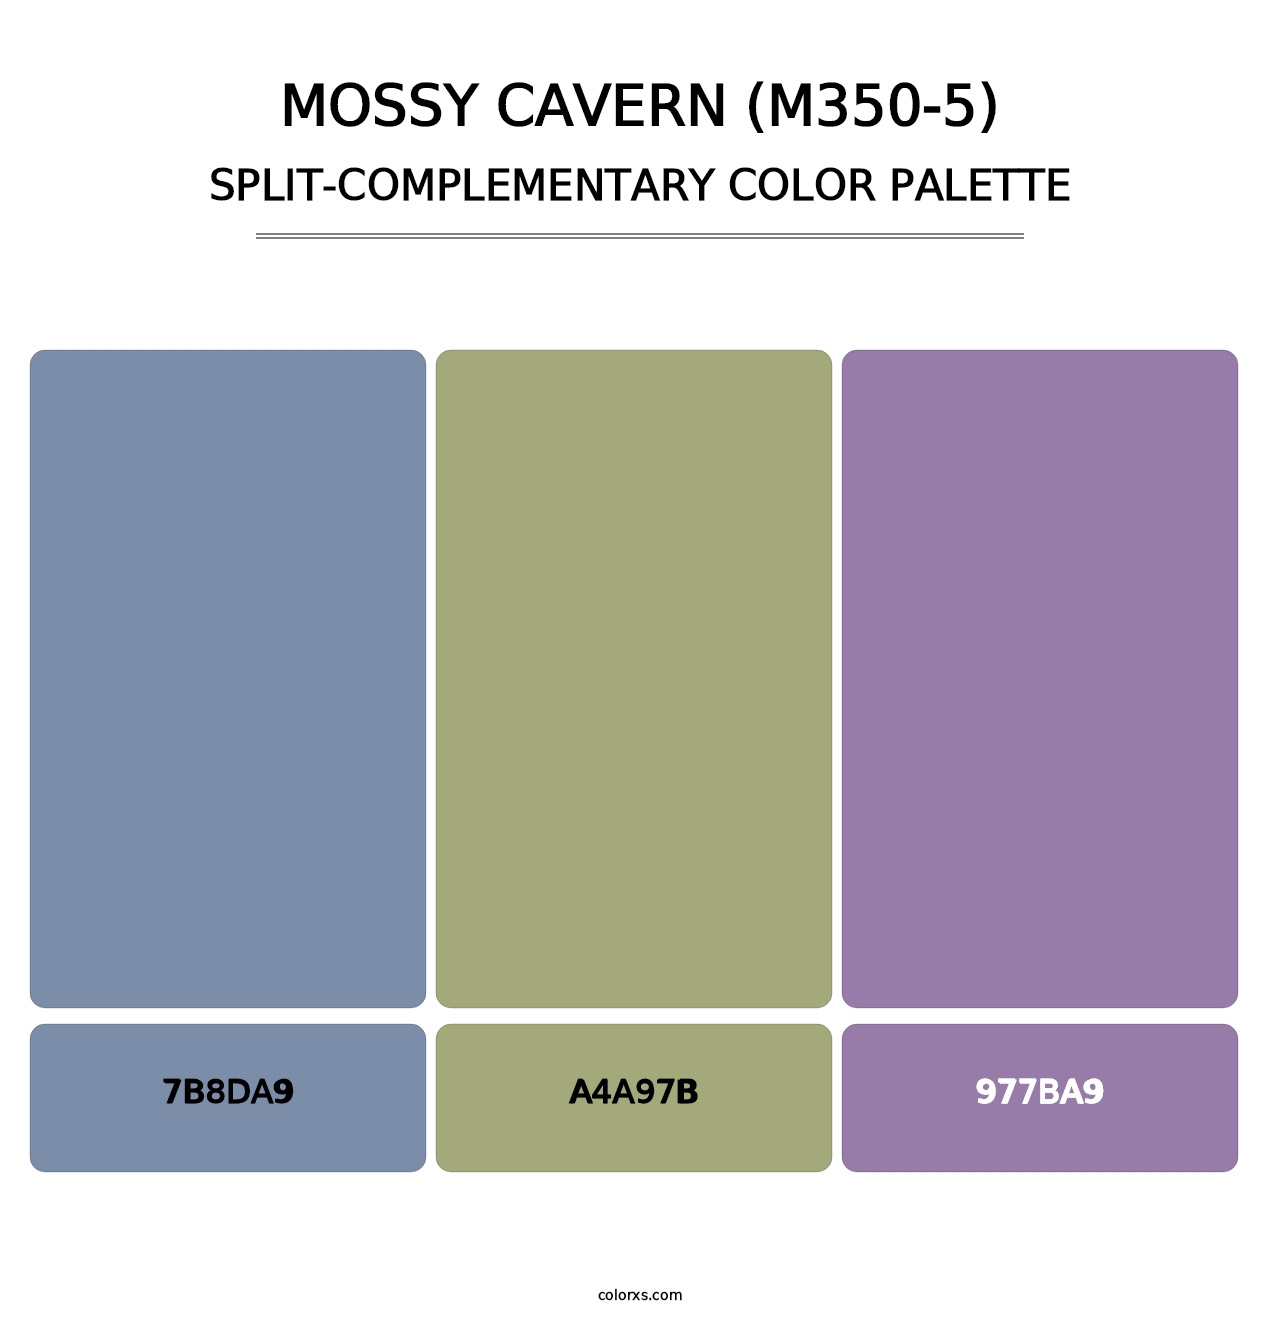 Mossy Cavern (M350-5) - Split-Complementary Color Palette